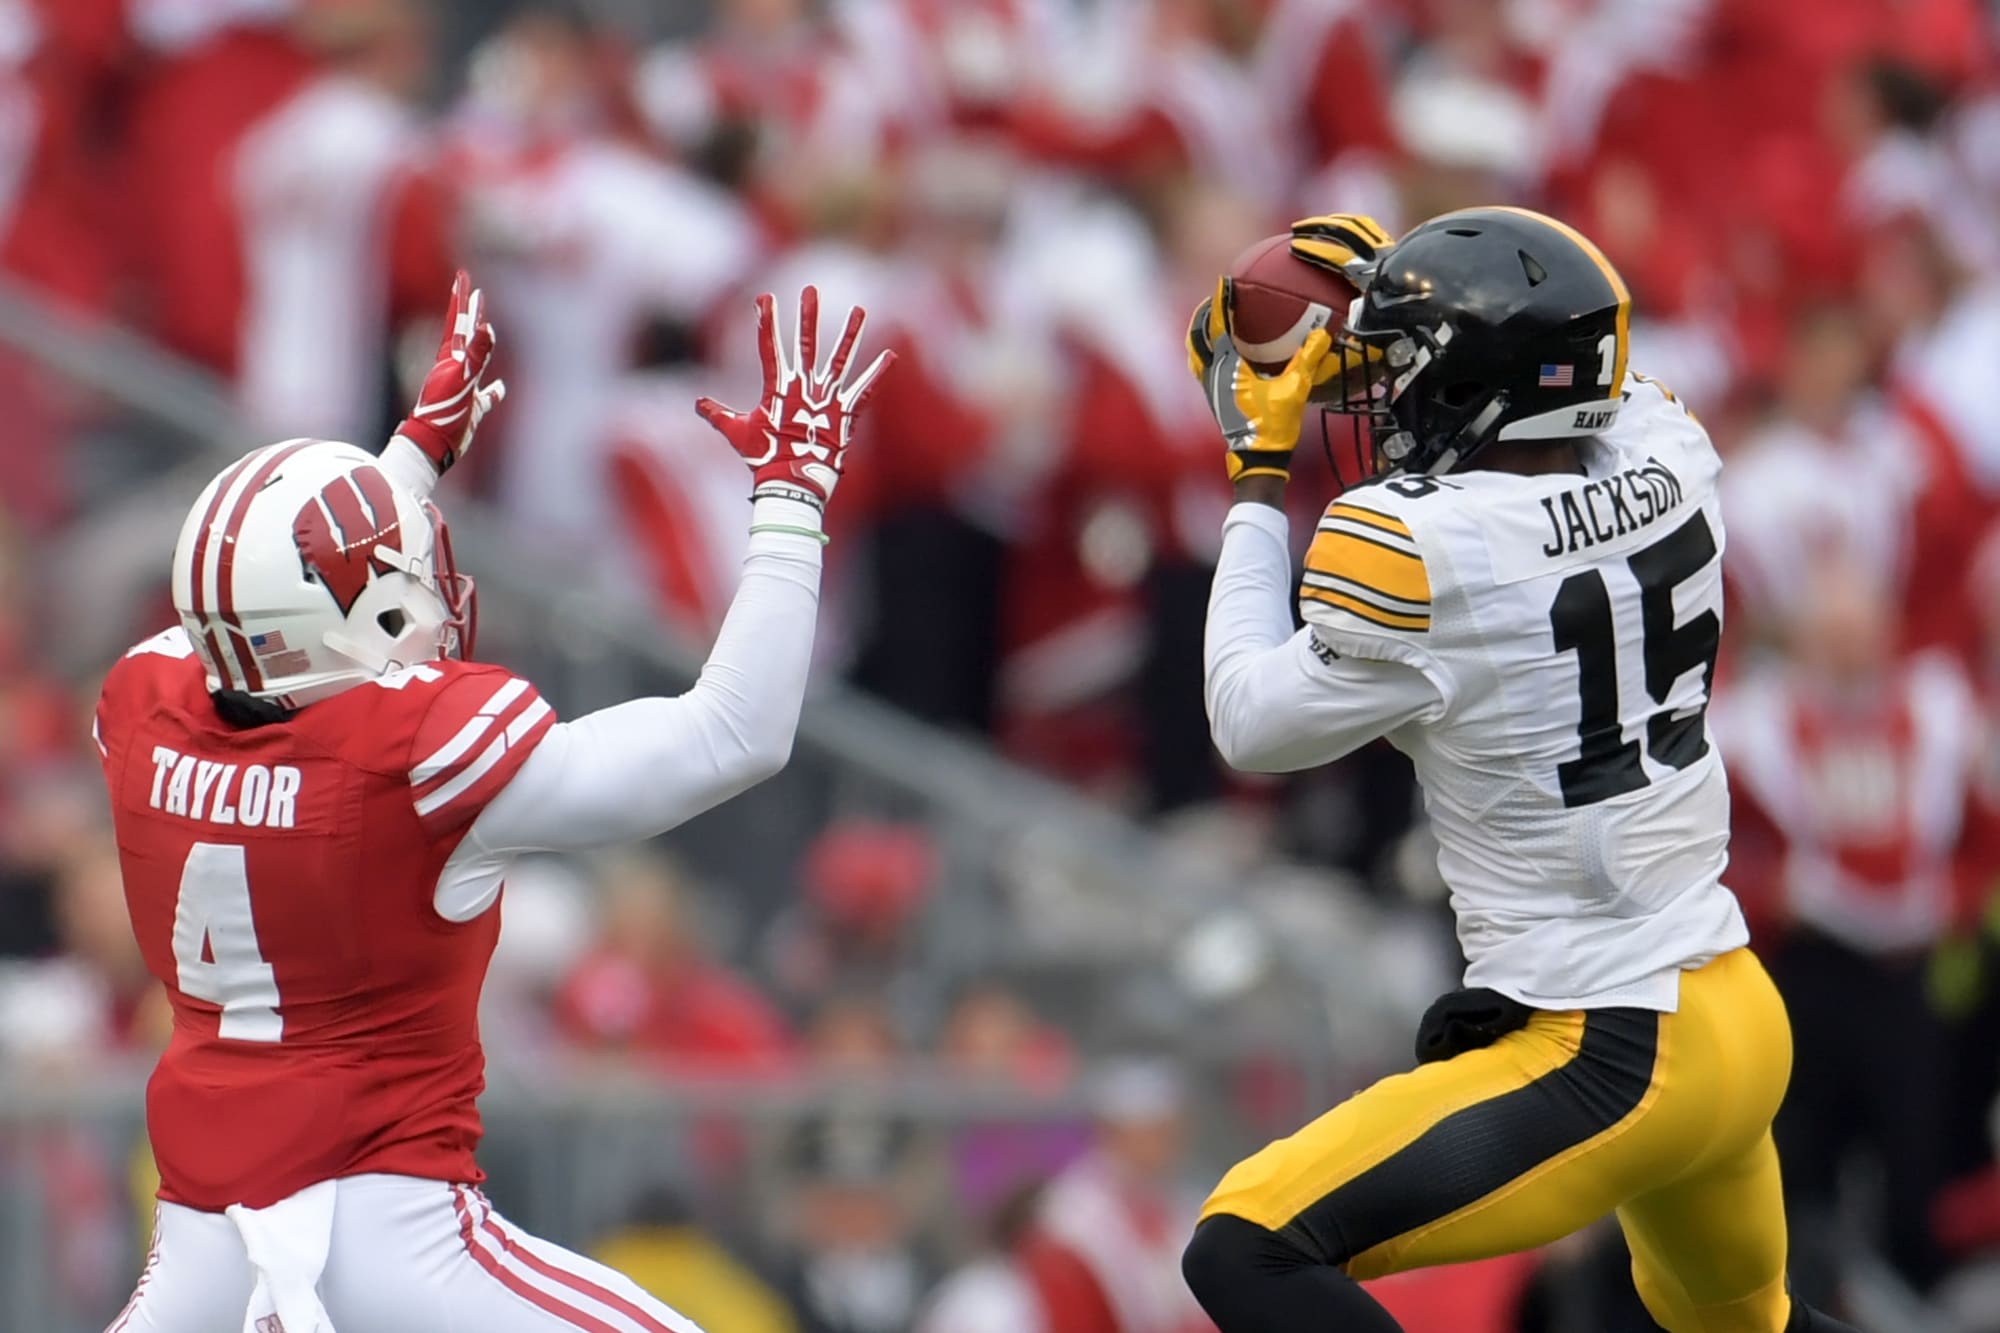 Big Ten West Iowa Hawkeyes head to NYC for Bowl Game